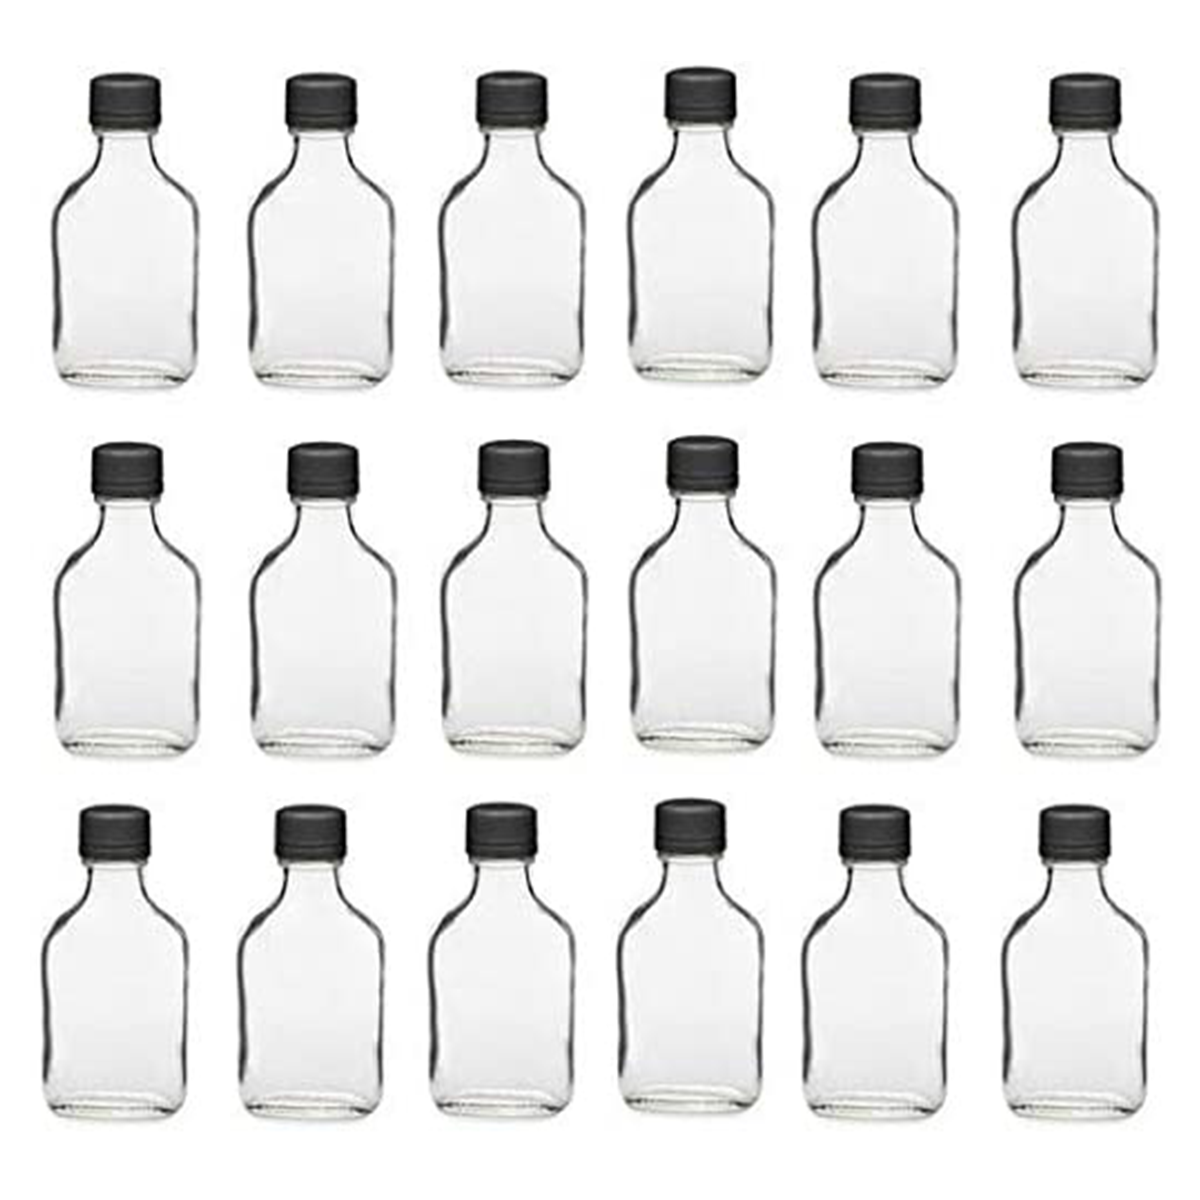 100ml Glass Flask Bottles with Black Tamper Evident Caps 100 Pc Carton - Willow